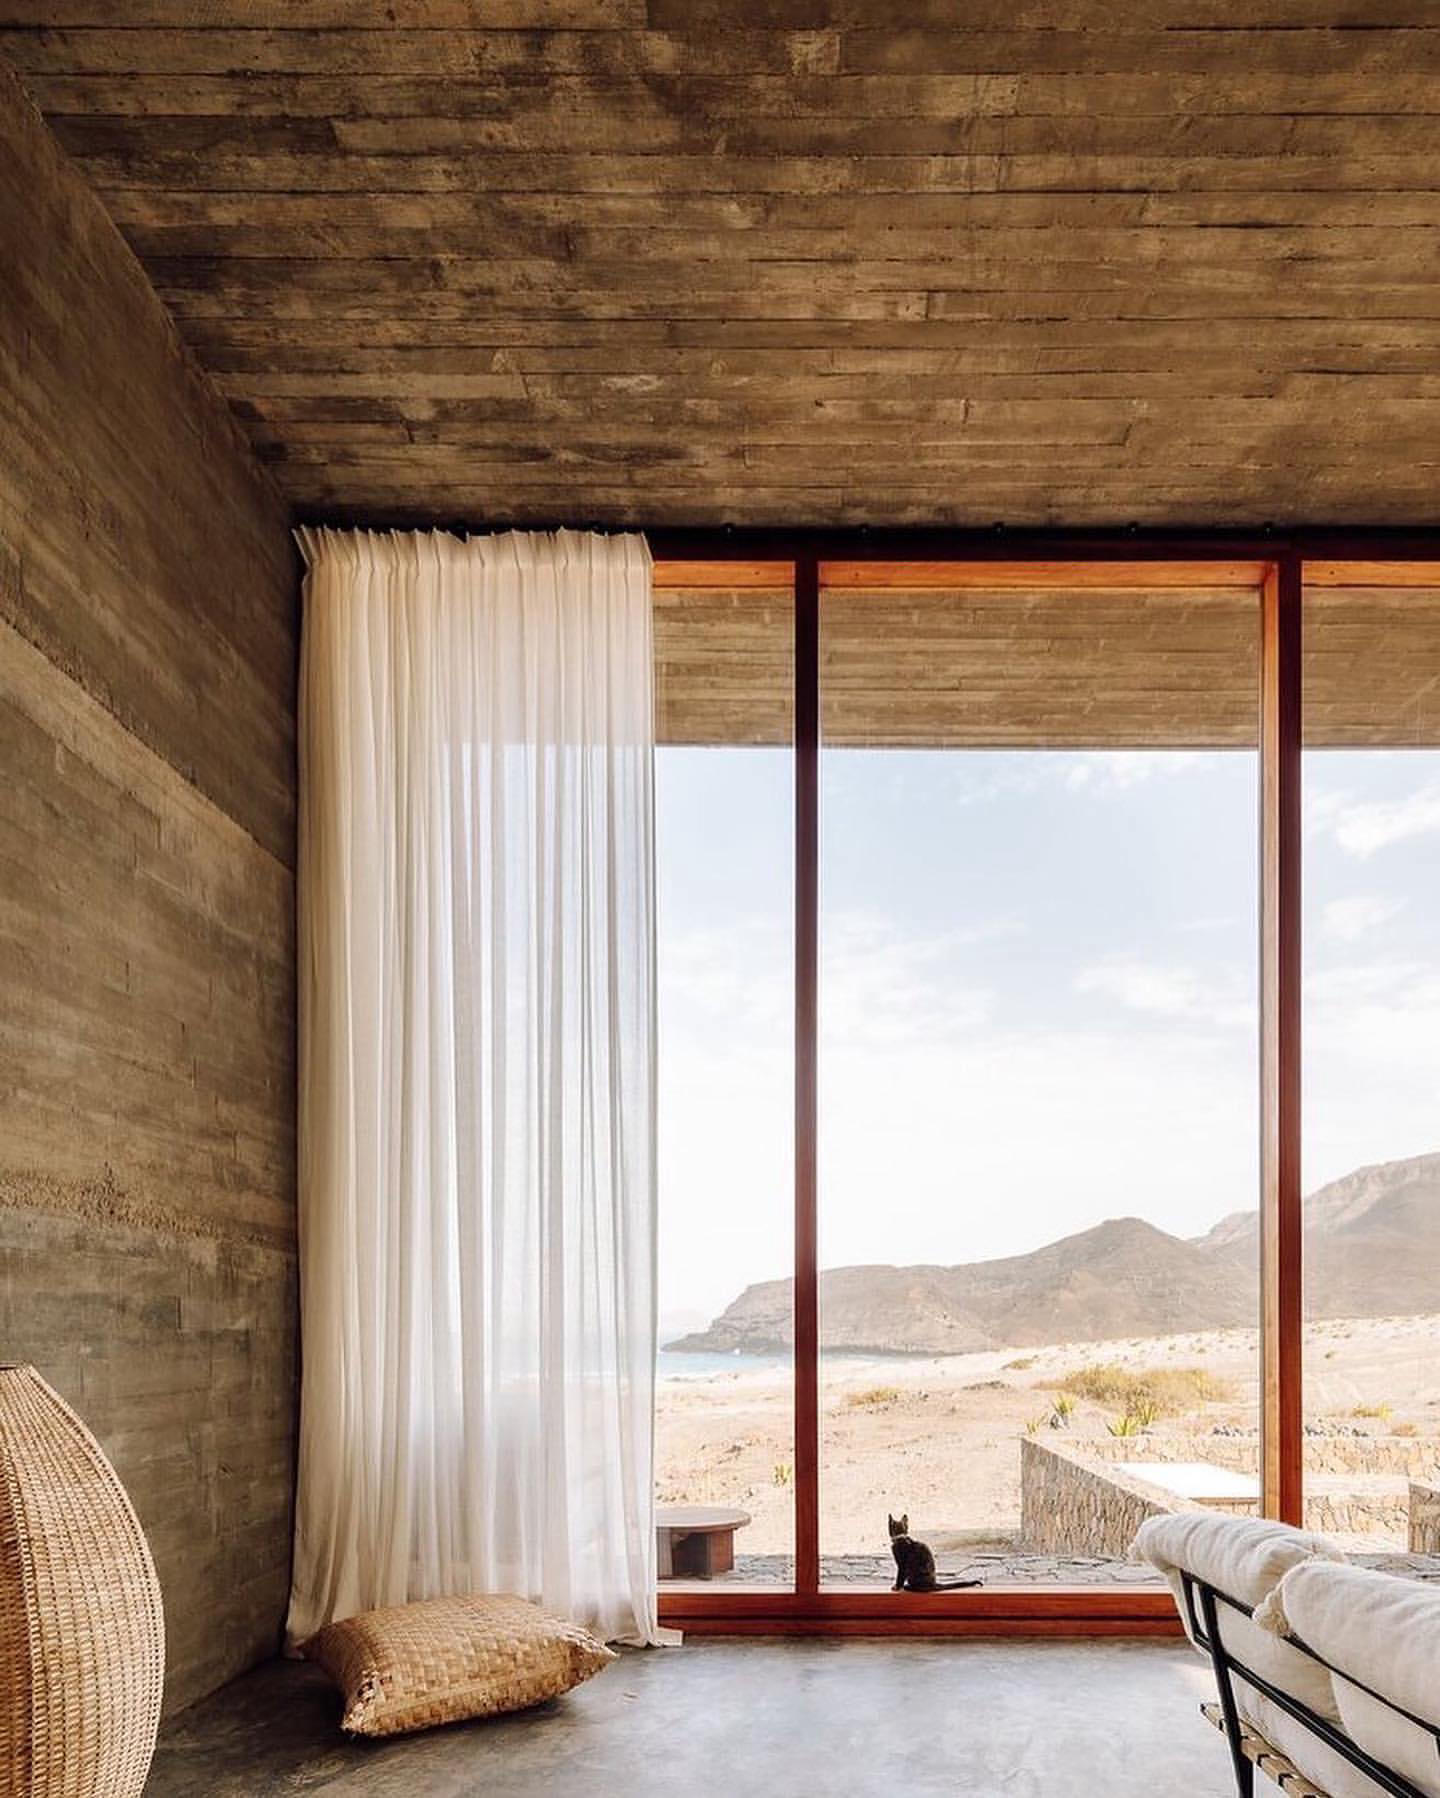 #barefootluxury_saovicente HotelCabo Verde, West-AfricaArchitects #polo_architecture Photography #fr